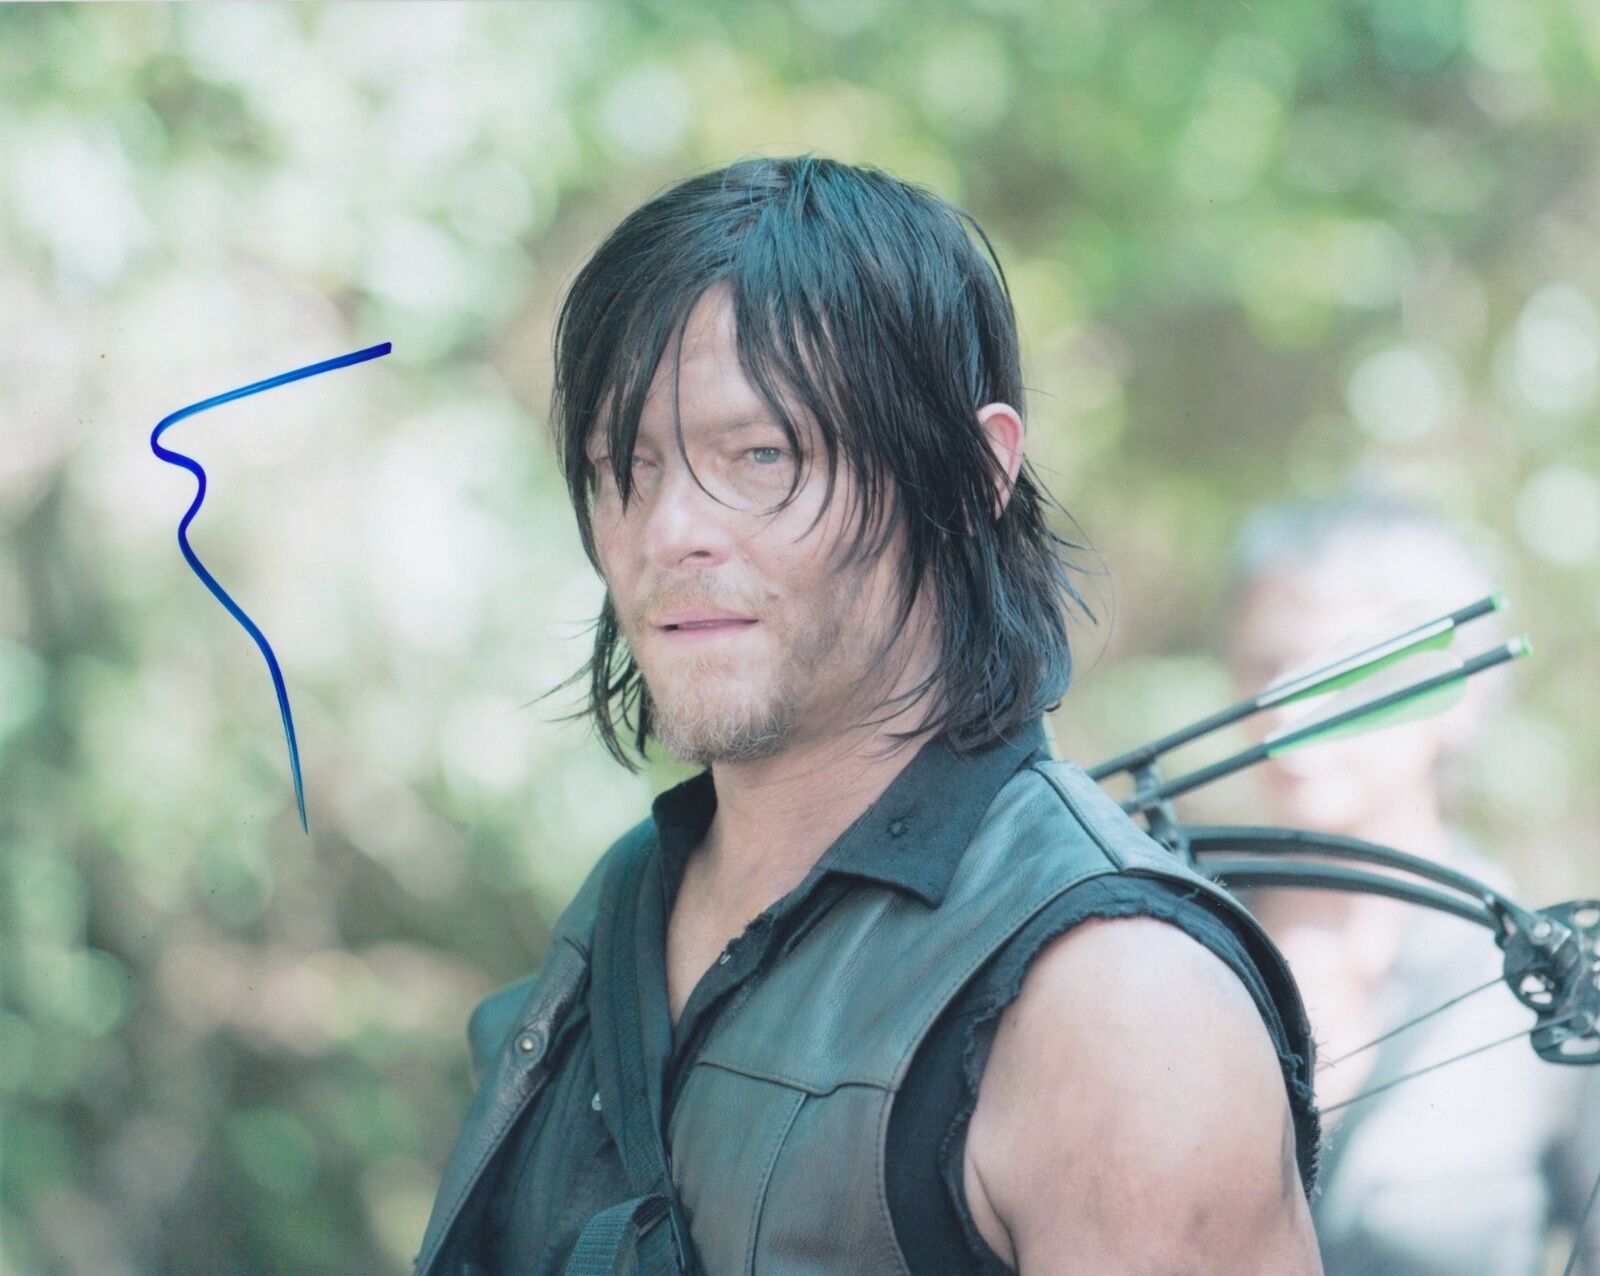 Norman Reedus Signed Autographed 8x10 Photo Poster painting Daryl Dixon The Walking Dead 4C